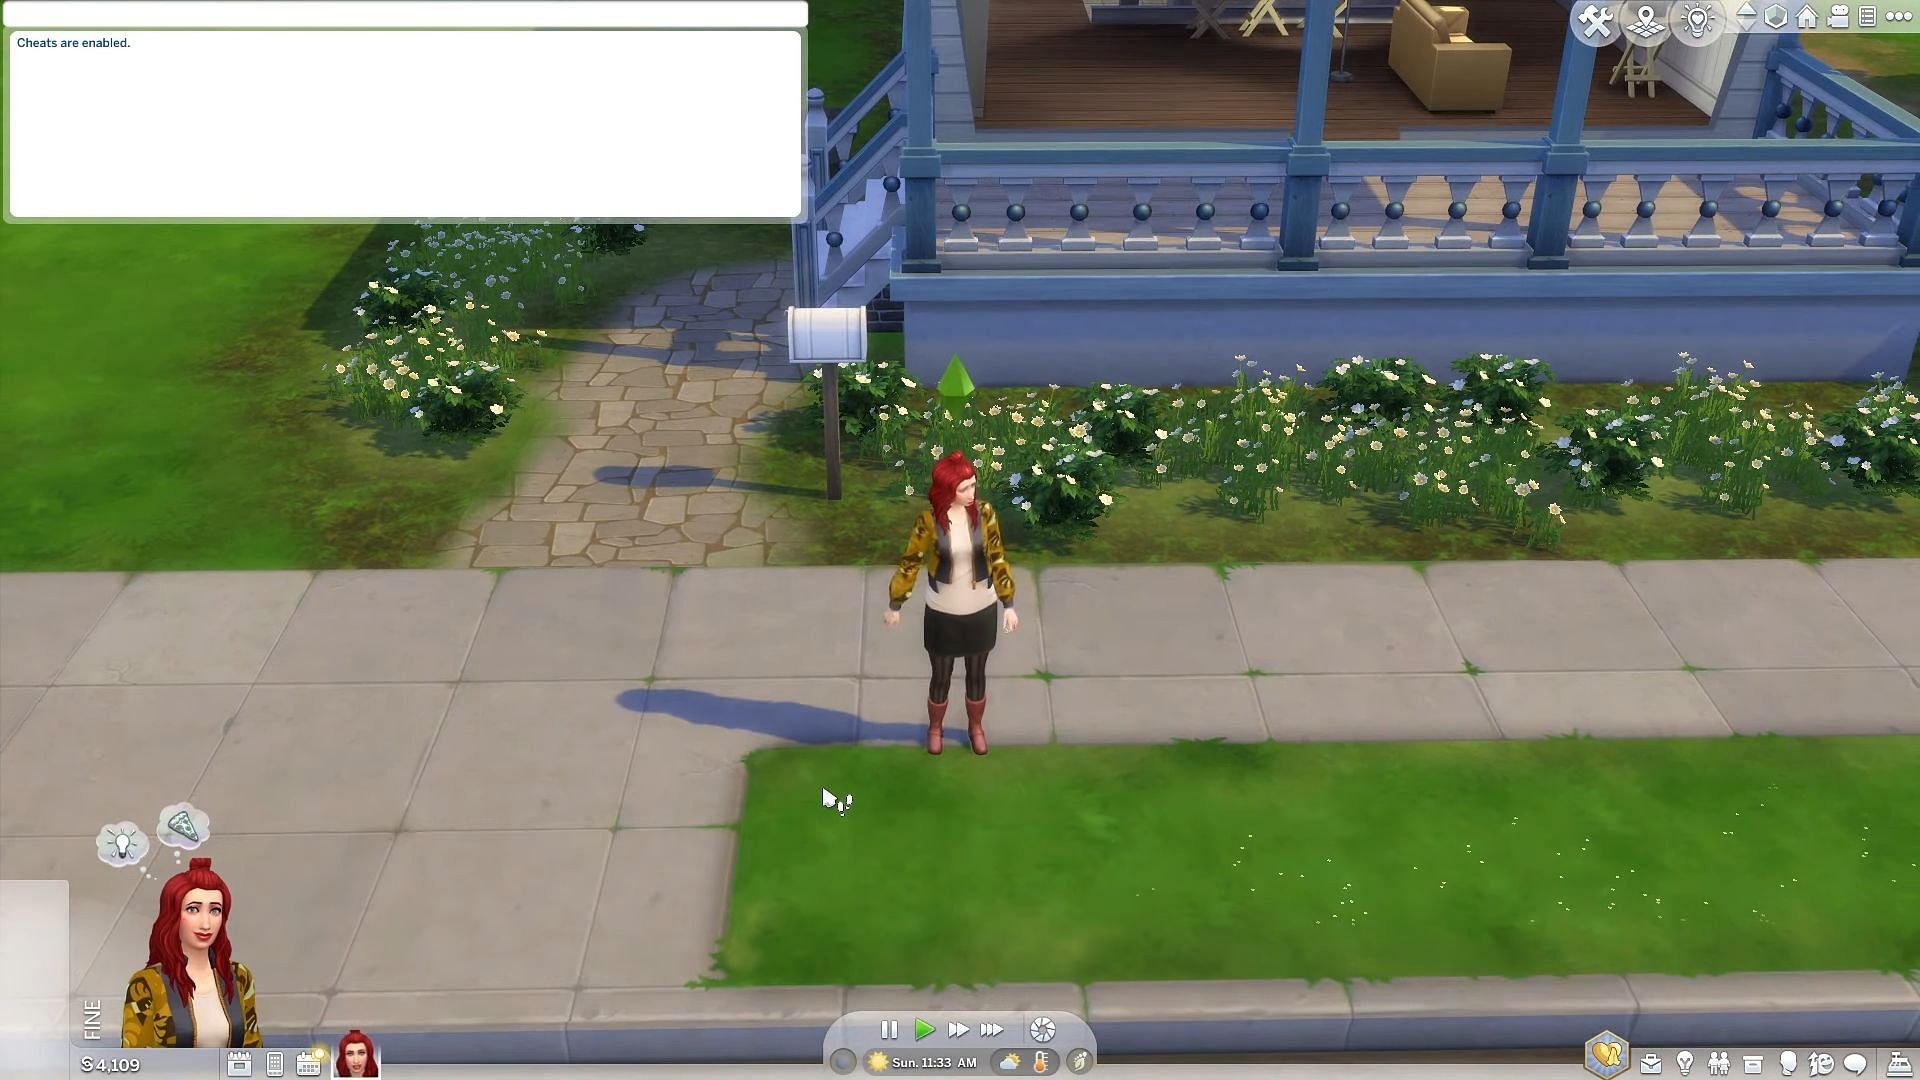 Enabling cheats (Image via YouTube/How to Sims)